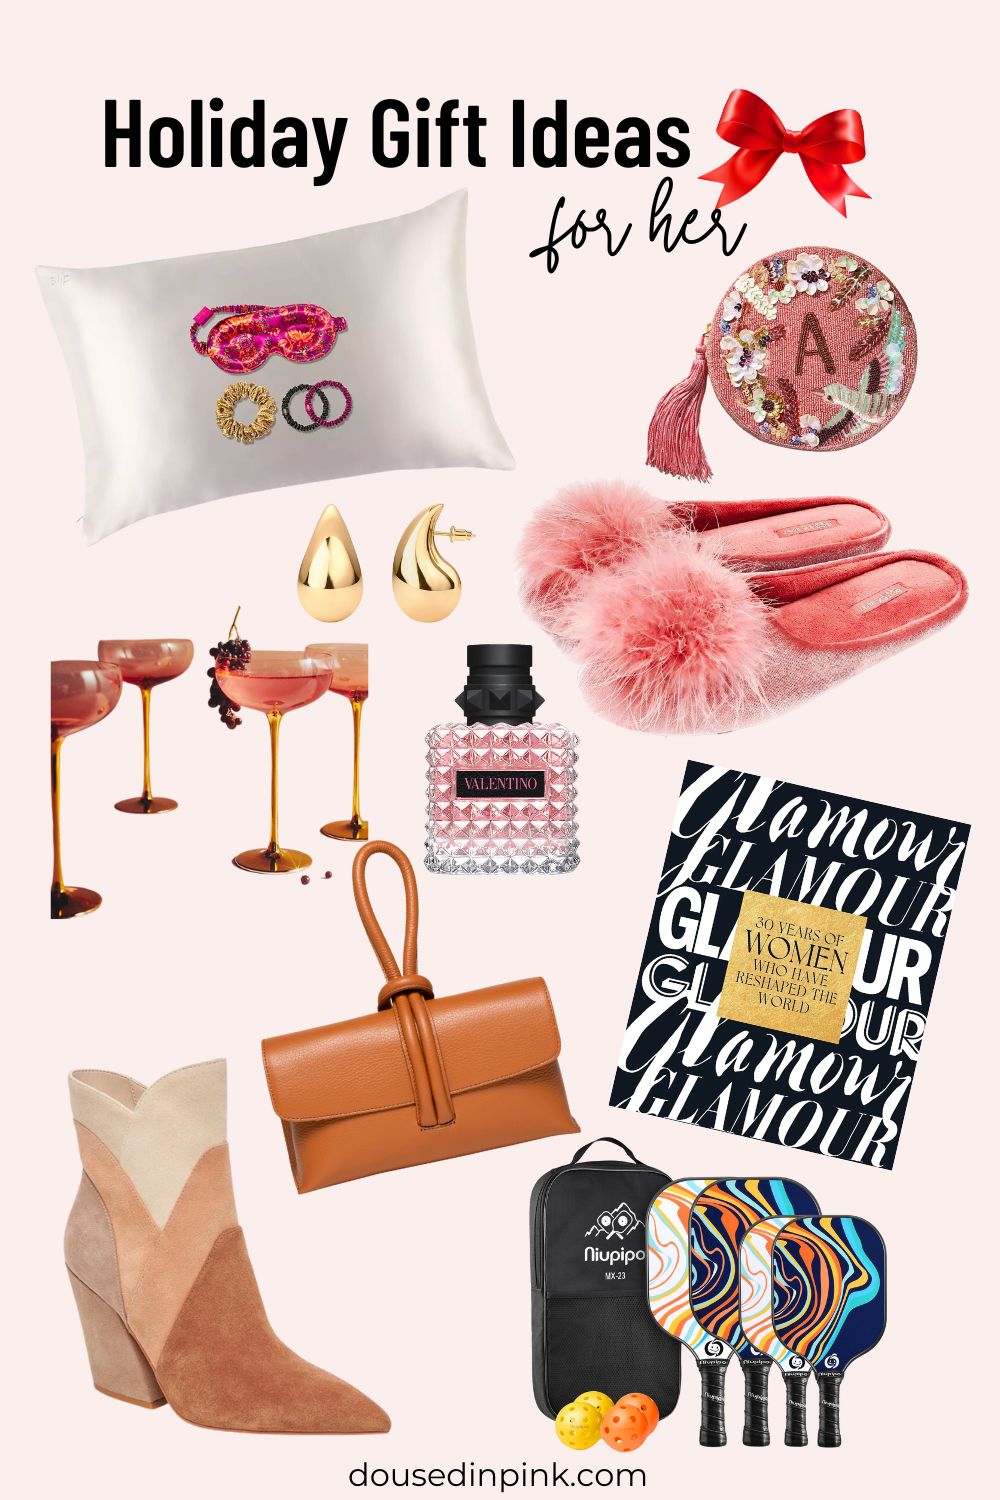 Holiday Gift Ideas for Her  20 Unique Finds - Doused in Pink